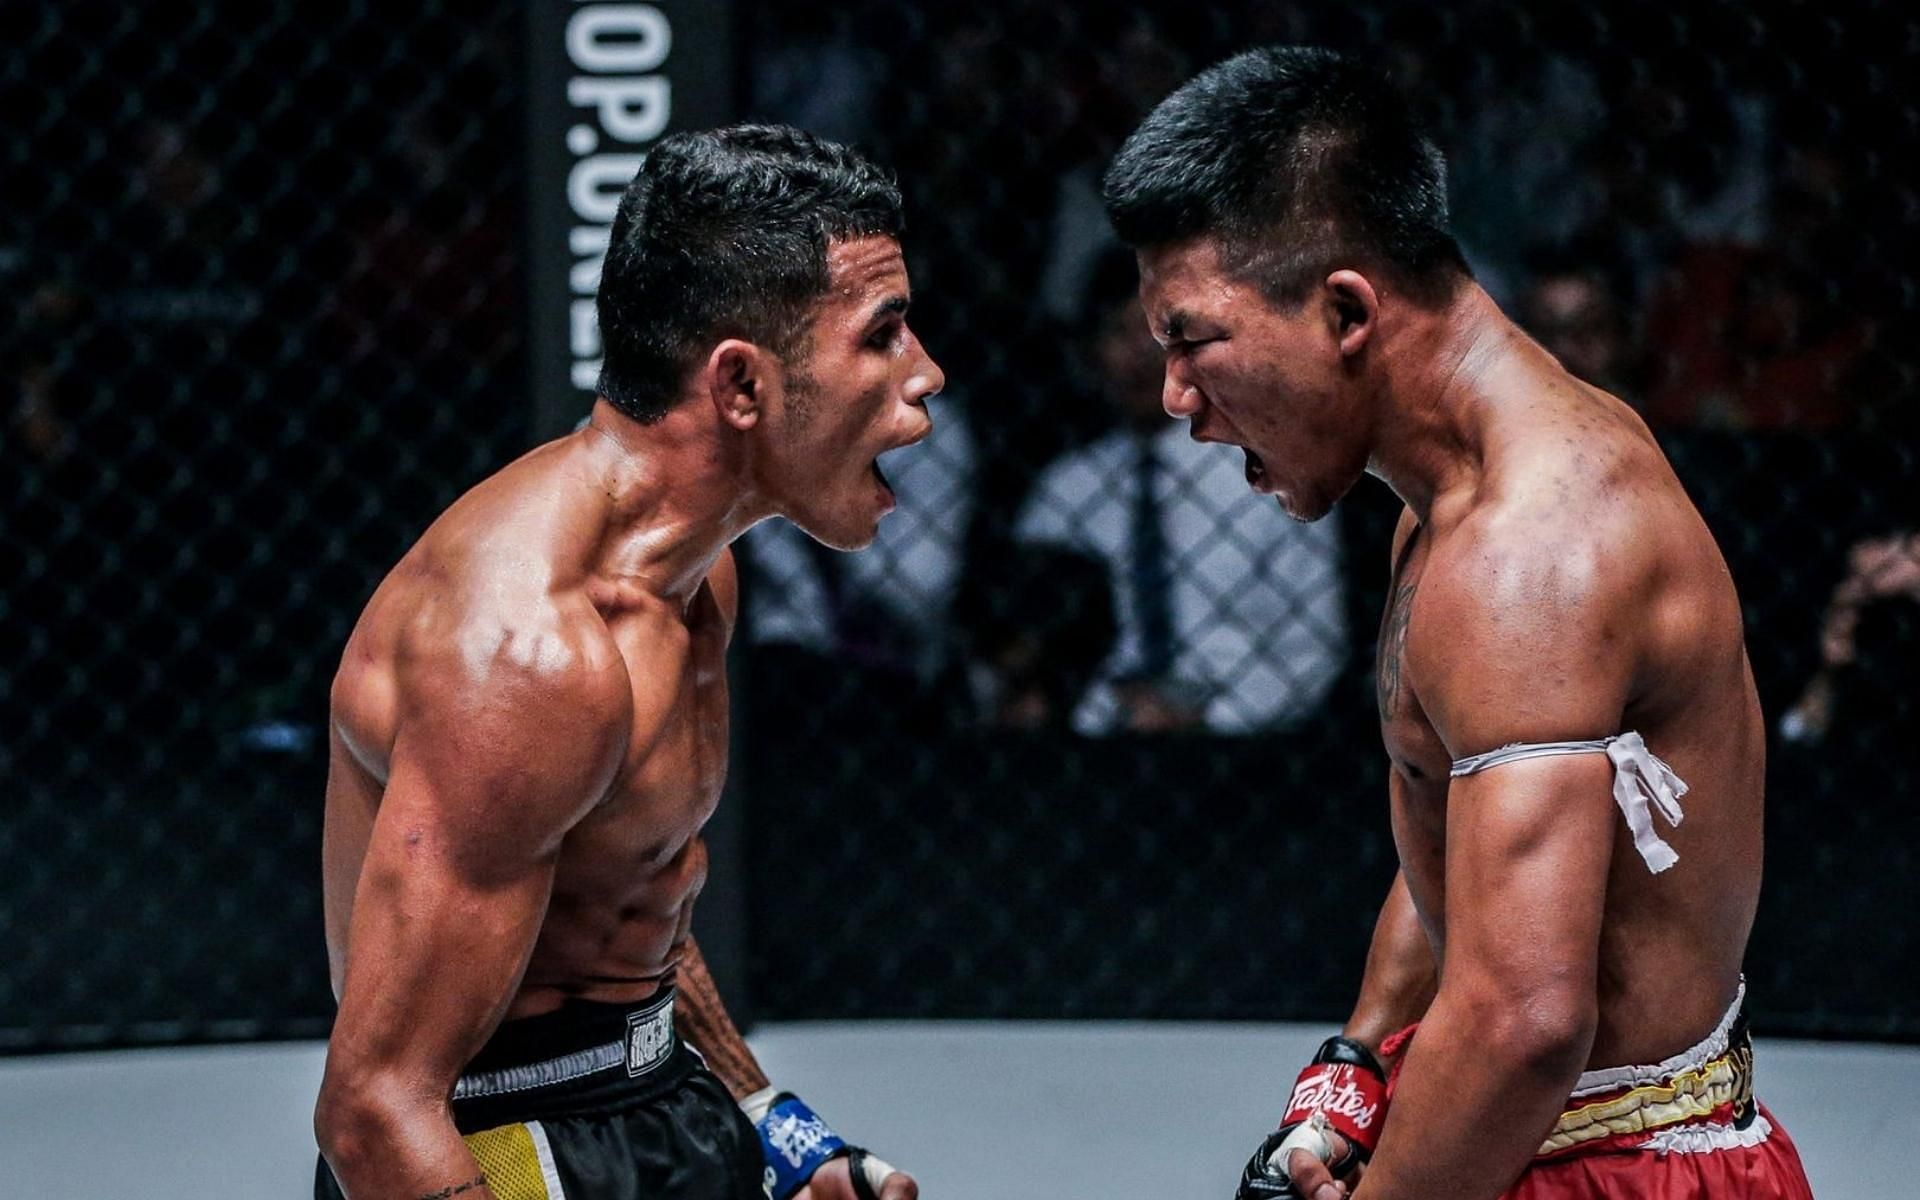 Walter Goncalves (left) and Rodtang Jitmuangnon (right) put on a banger back in 2019. (Image courtesy of ONE Championship)